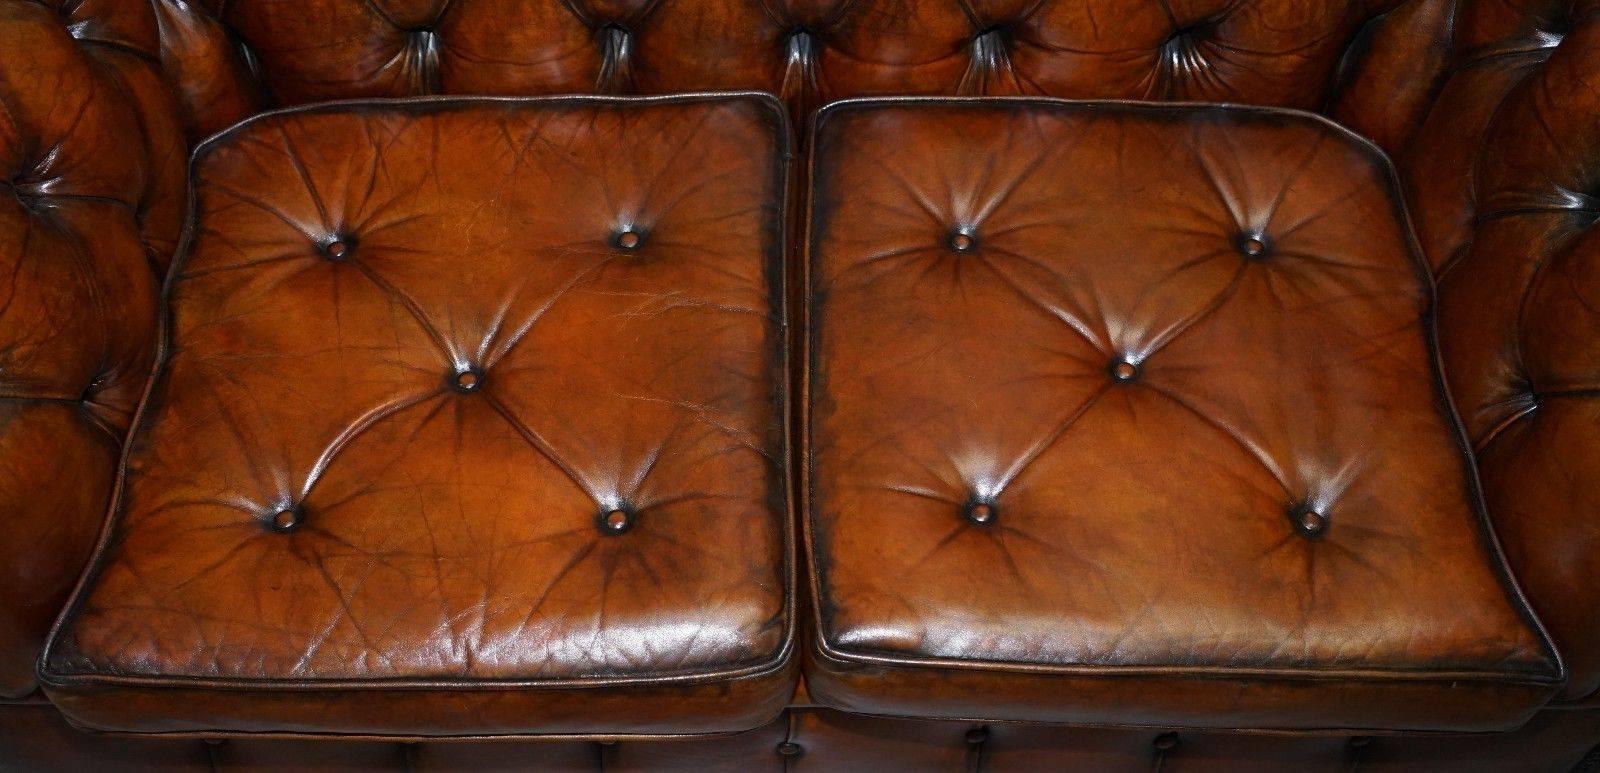 British Sprung Walnut Thomas Chippendale Restored Aged Brown Leather Chesterfield Sofa